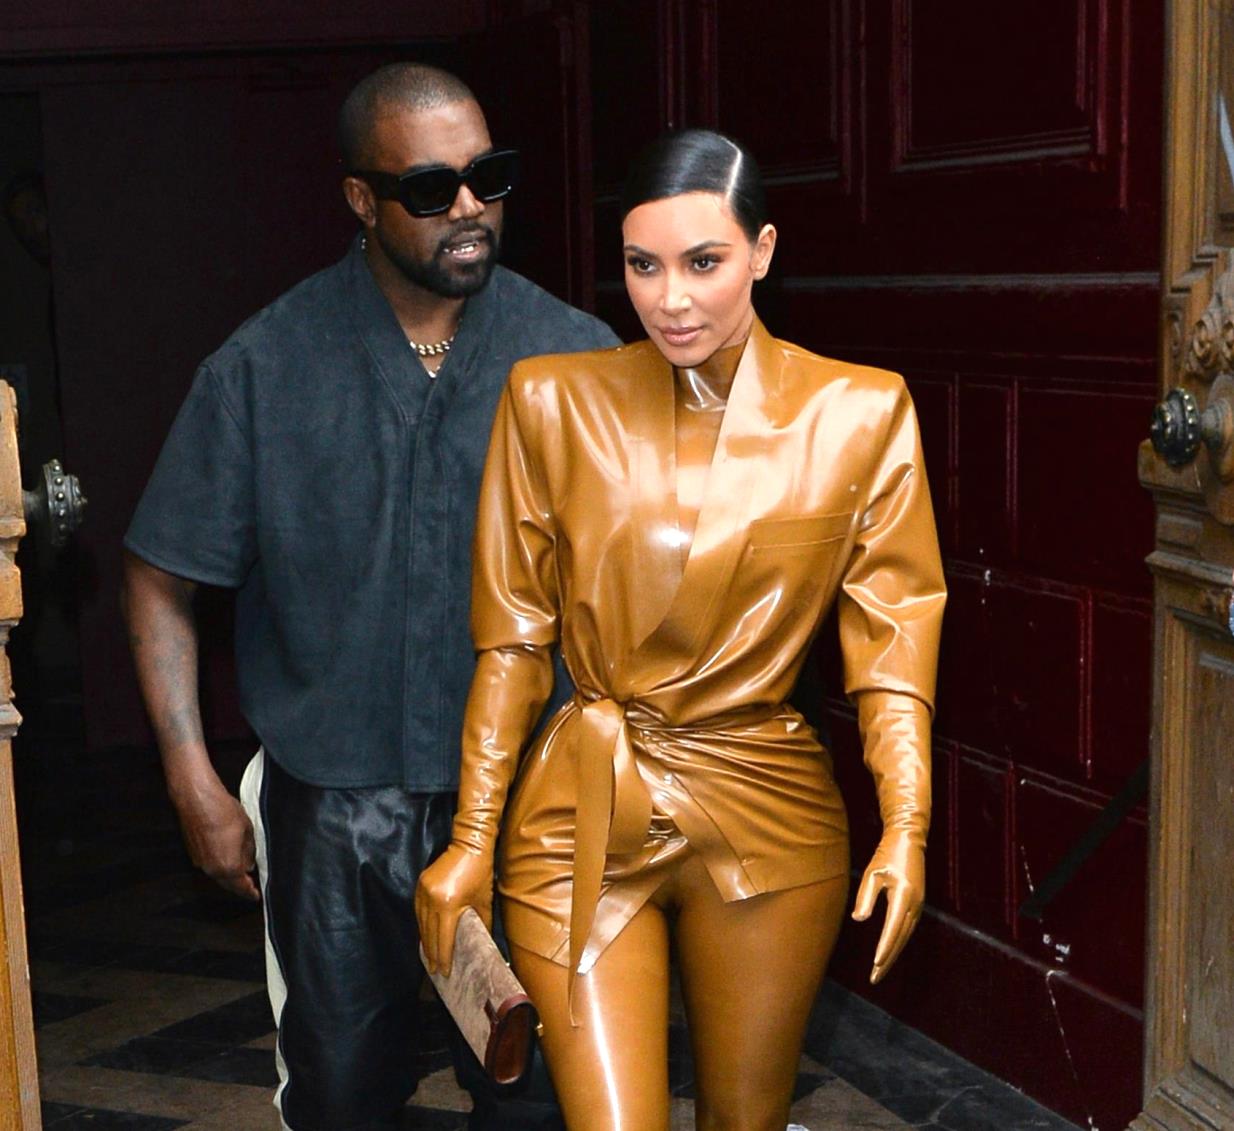 Kim Kardashian Reveals Reason Behind Kanye West Divorce, Says She is Going to Have "More Fun" Post-Split